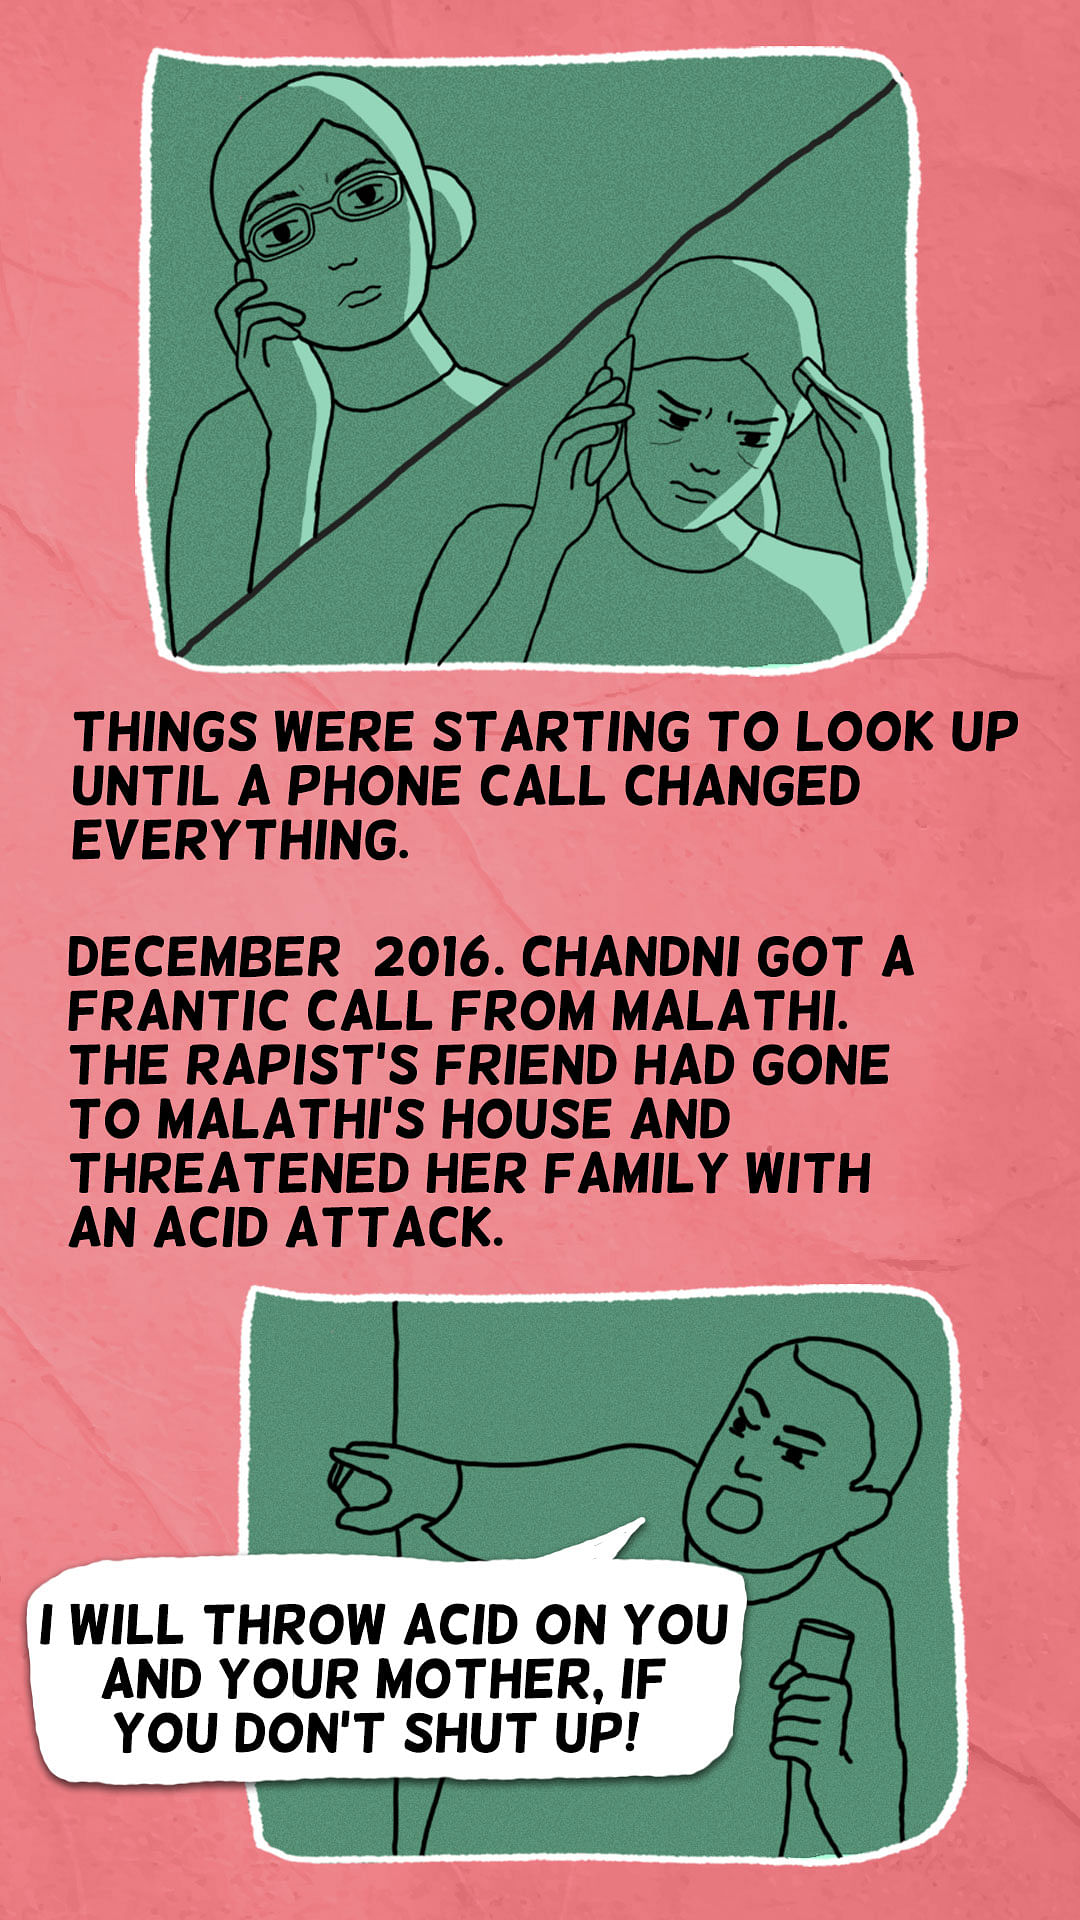  When trauma after rape causes memory loss, what does recovery look like? This is the story of 16-year-old Malathi.*